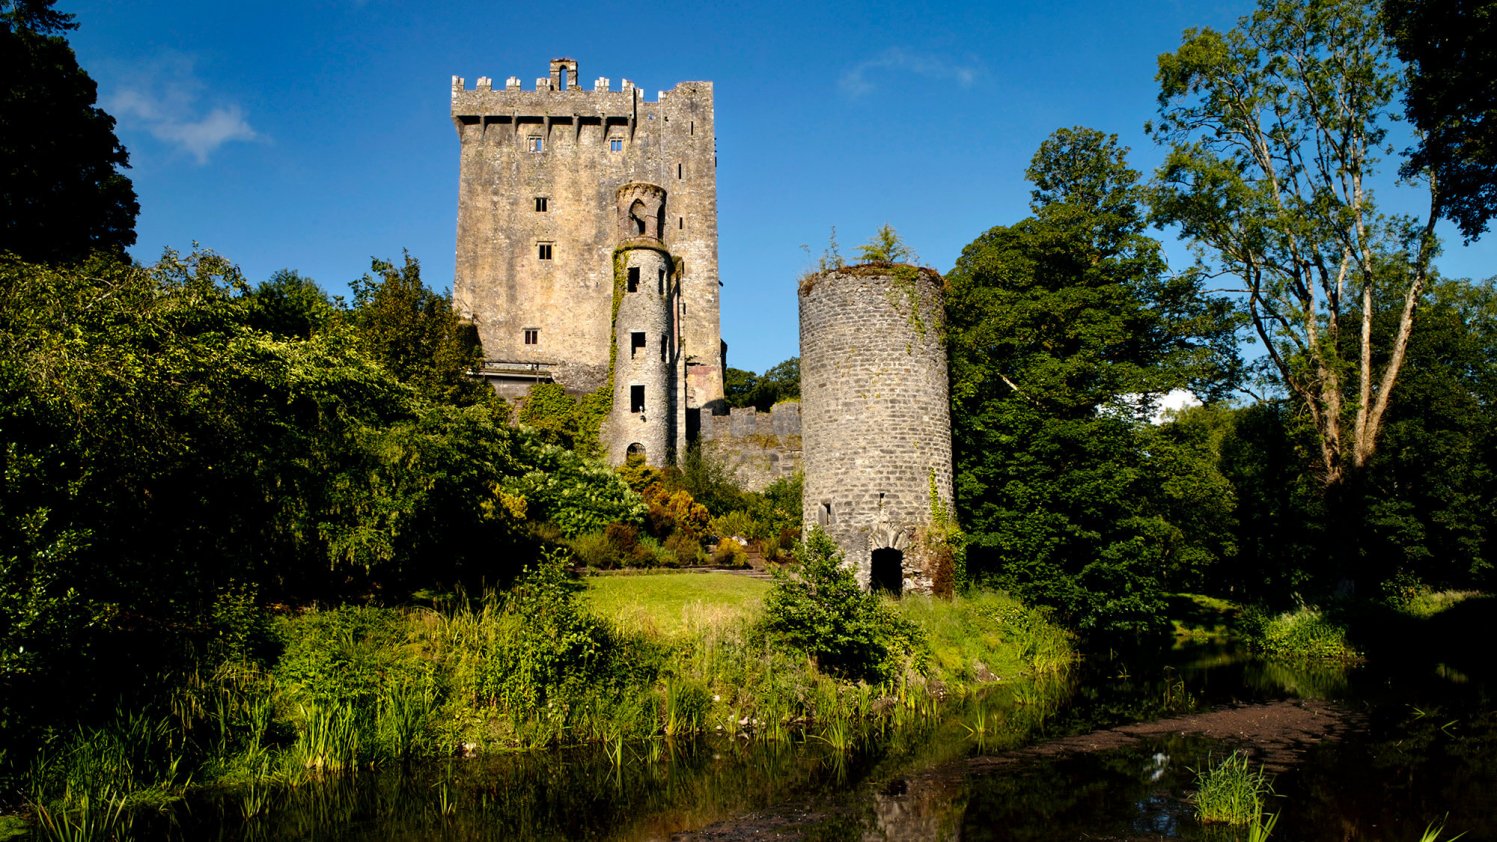 River view of Blarney Castle Gardens and Tower